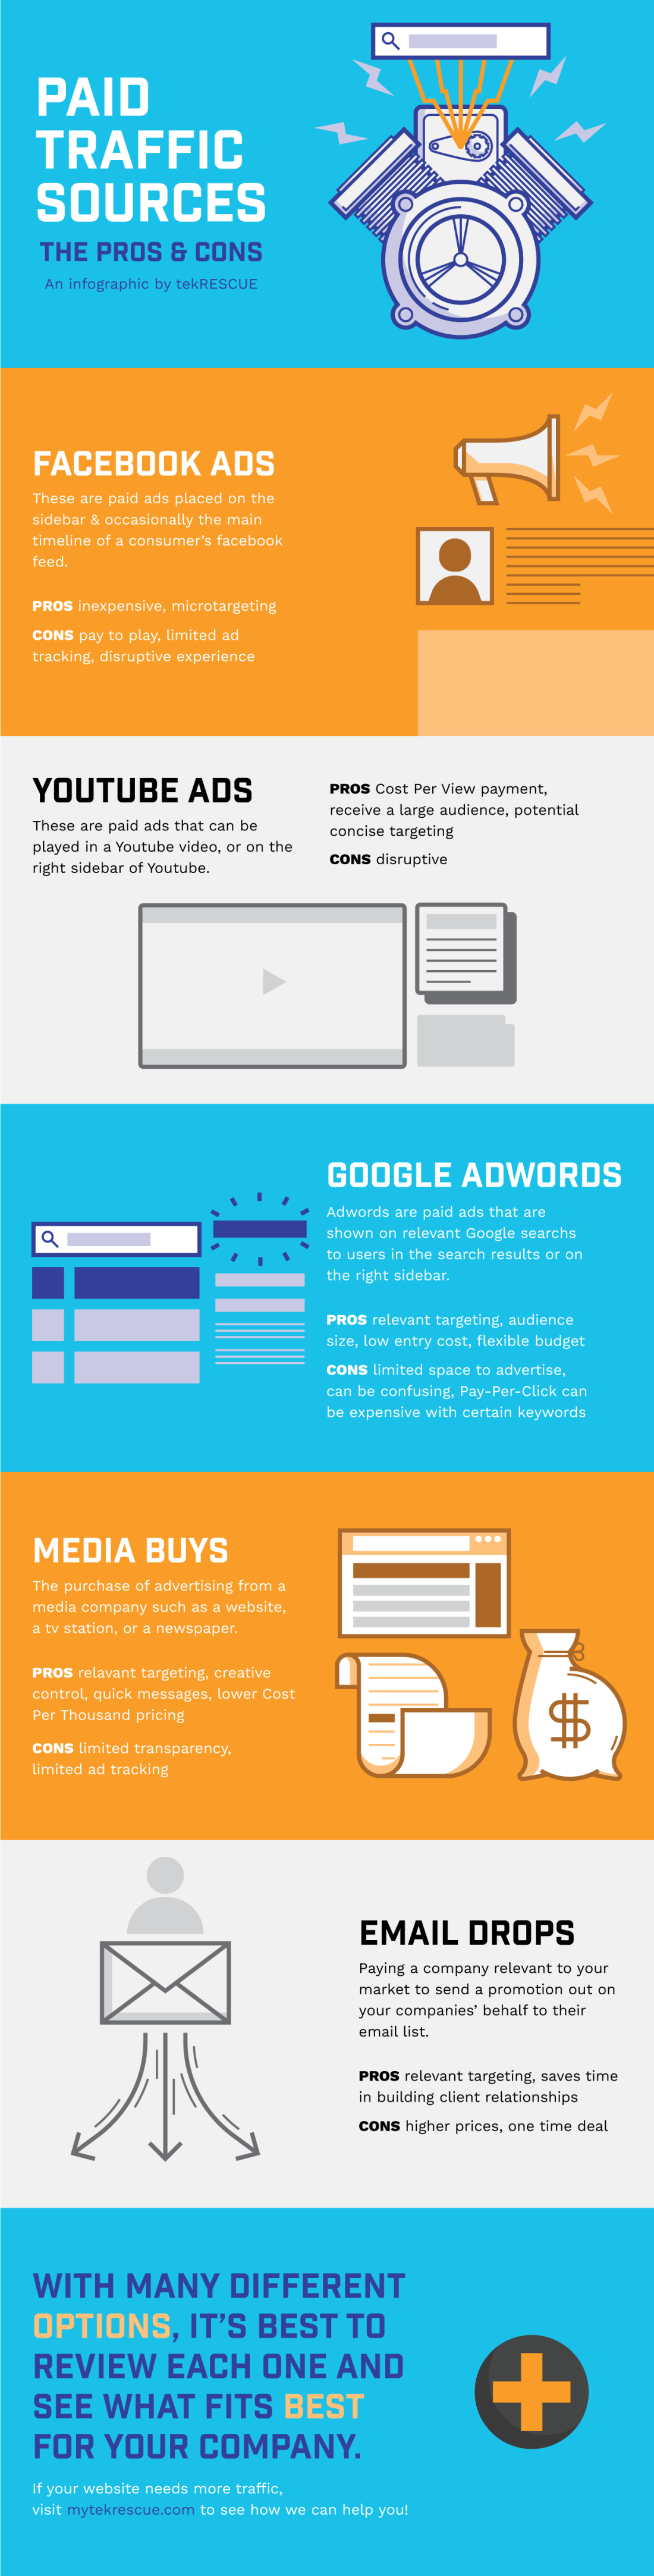 Paid Traffic Sources - #infographic